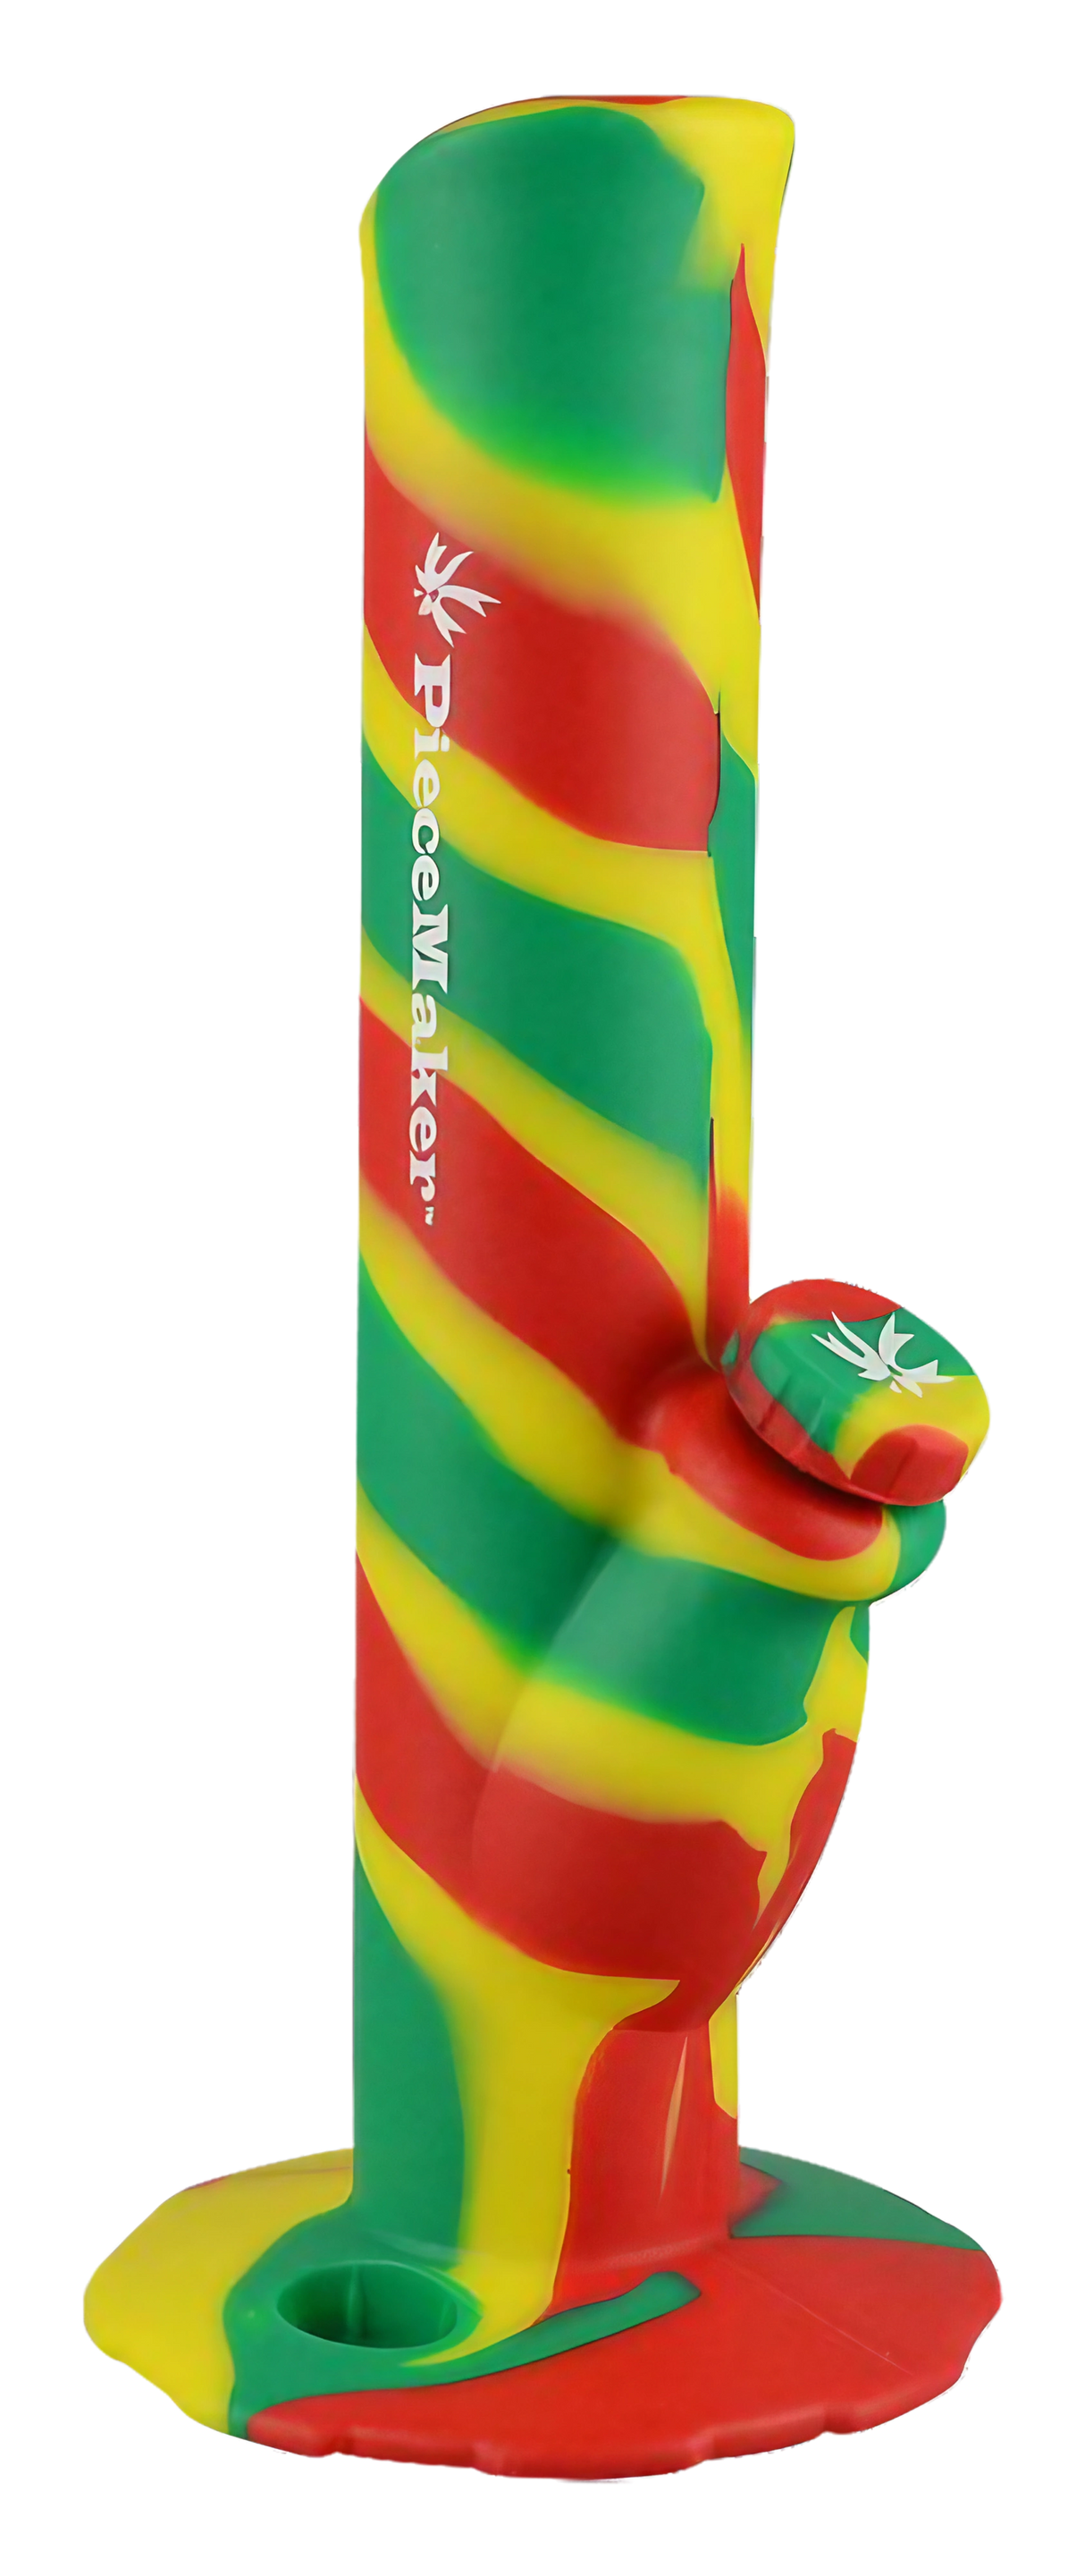 PieceMaker Kermit Silicone Water Pipe in Rasta colors, front view, glow-in-the-dark feature